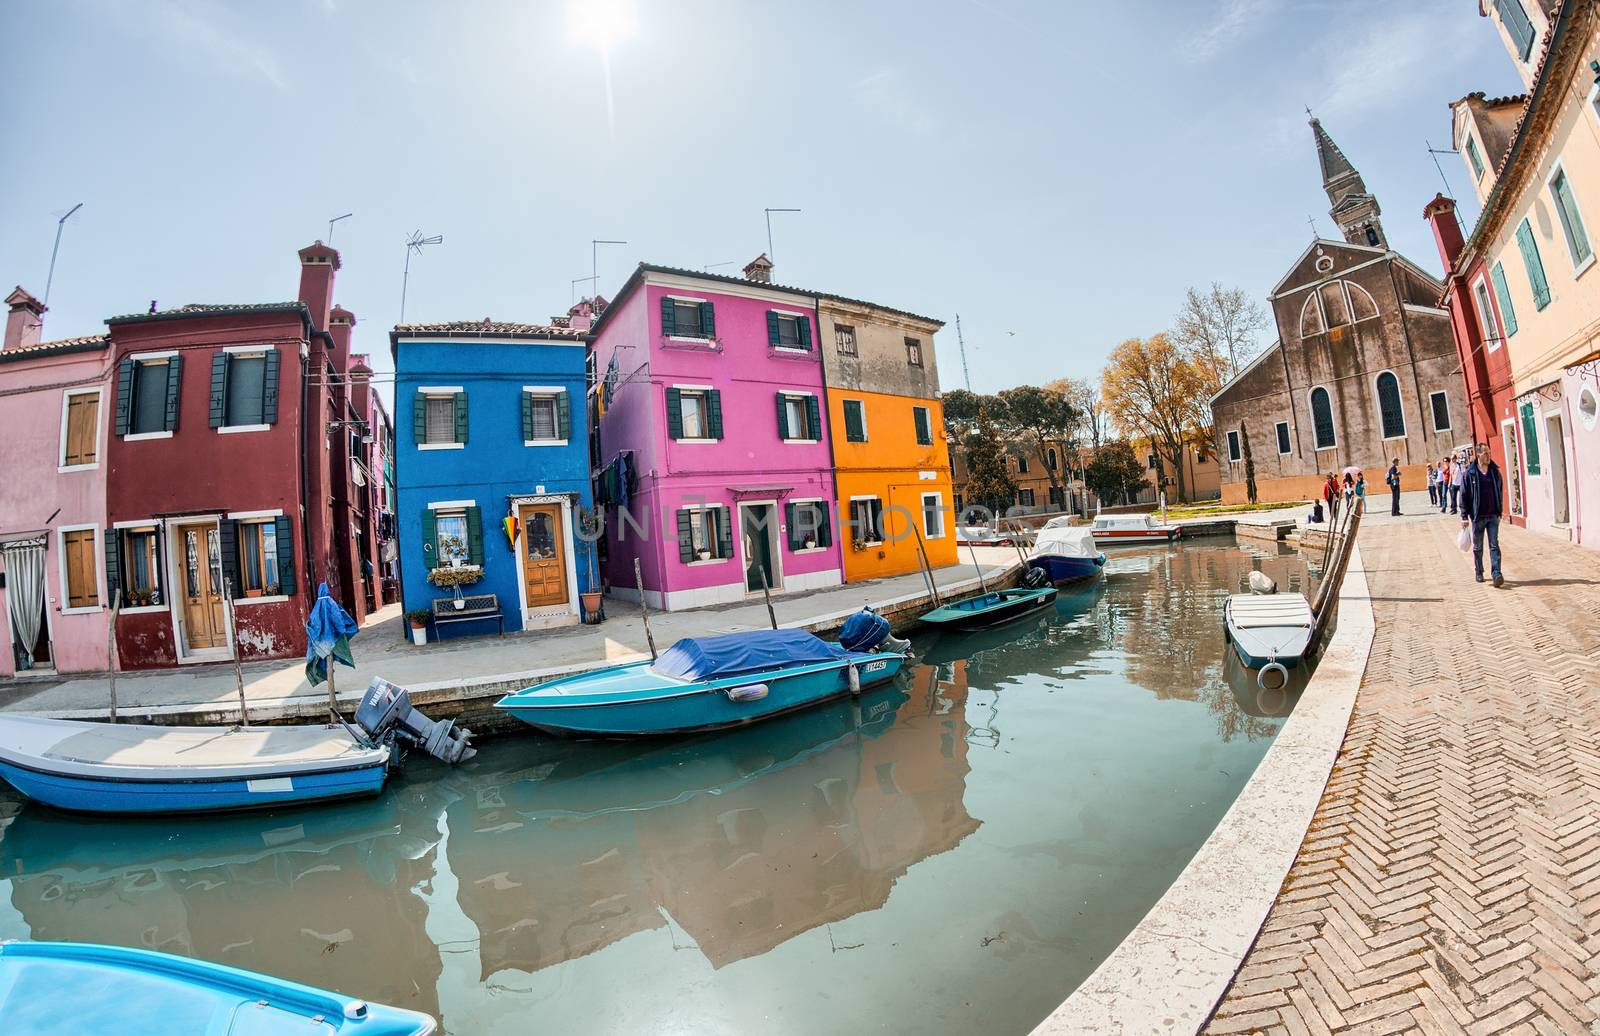 BURANO, ITALY - APRIL 8, 2014: Tourists enjoy colourful city bui by jovannig